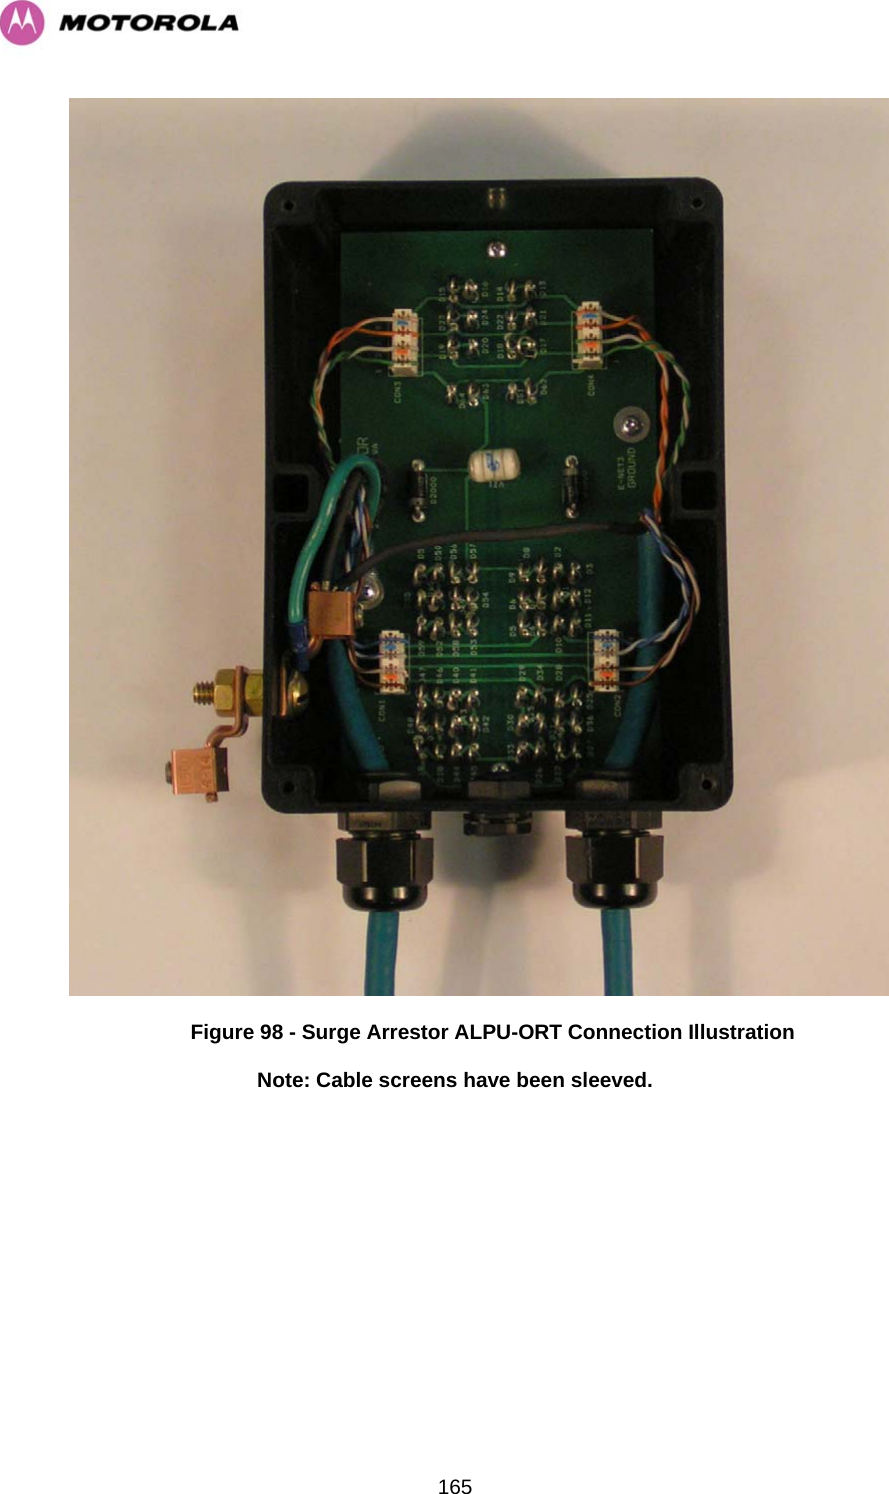   165 Figure 98 - Surge Arrestor ALPU-ORT Connection Illustration Note: Cable screens have been sleeved. 